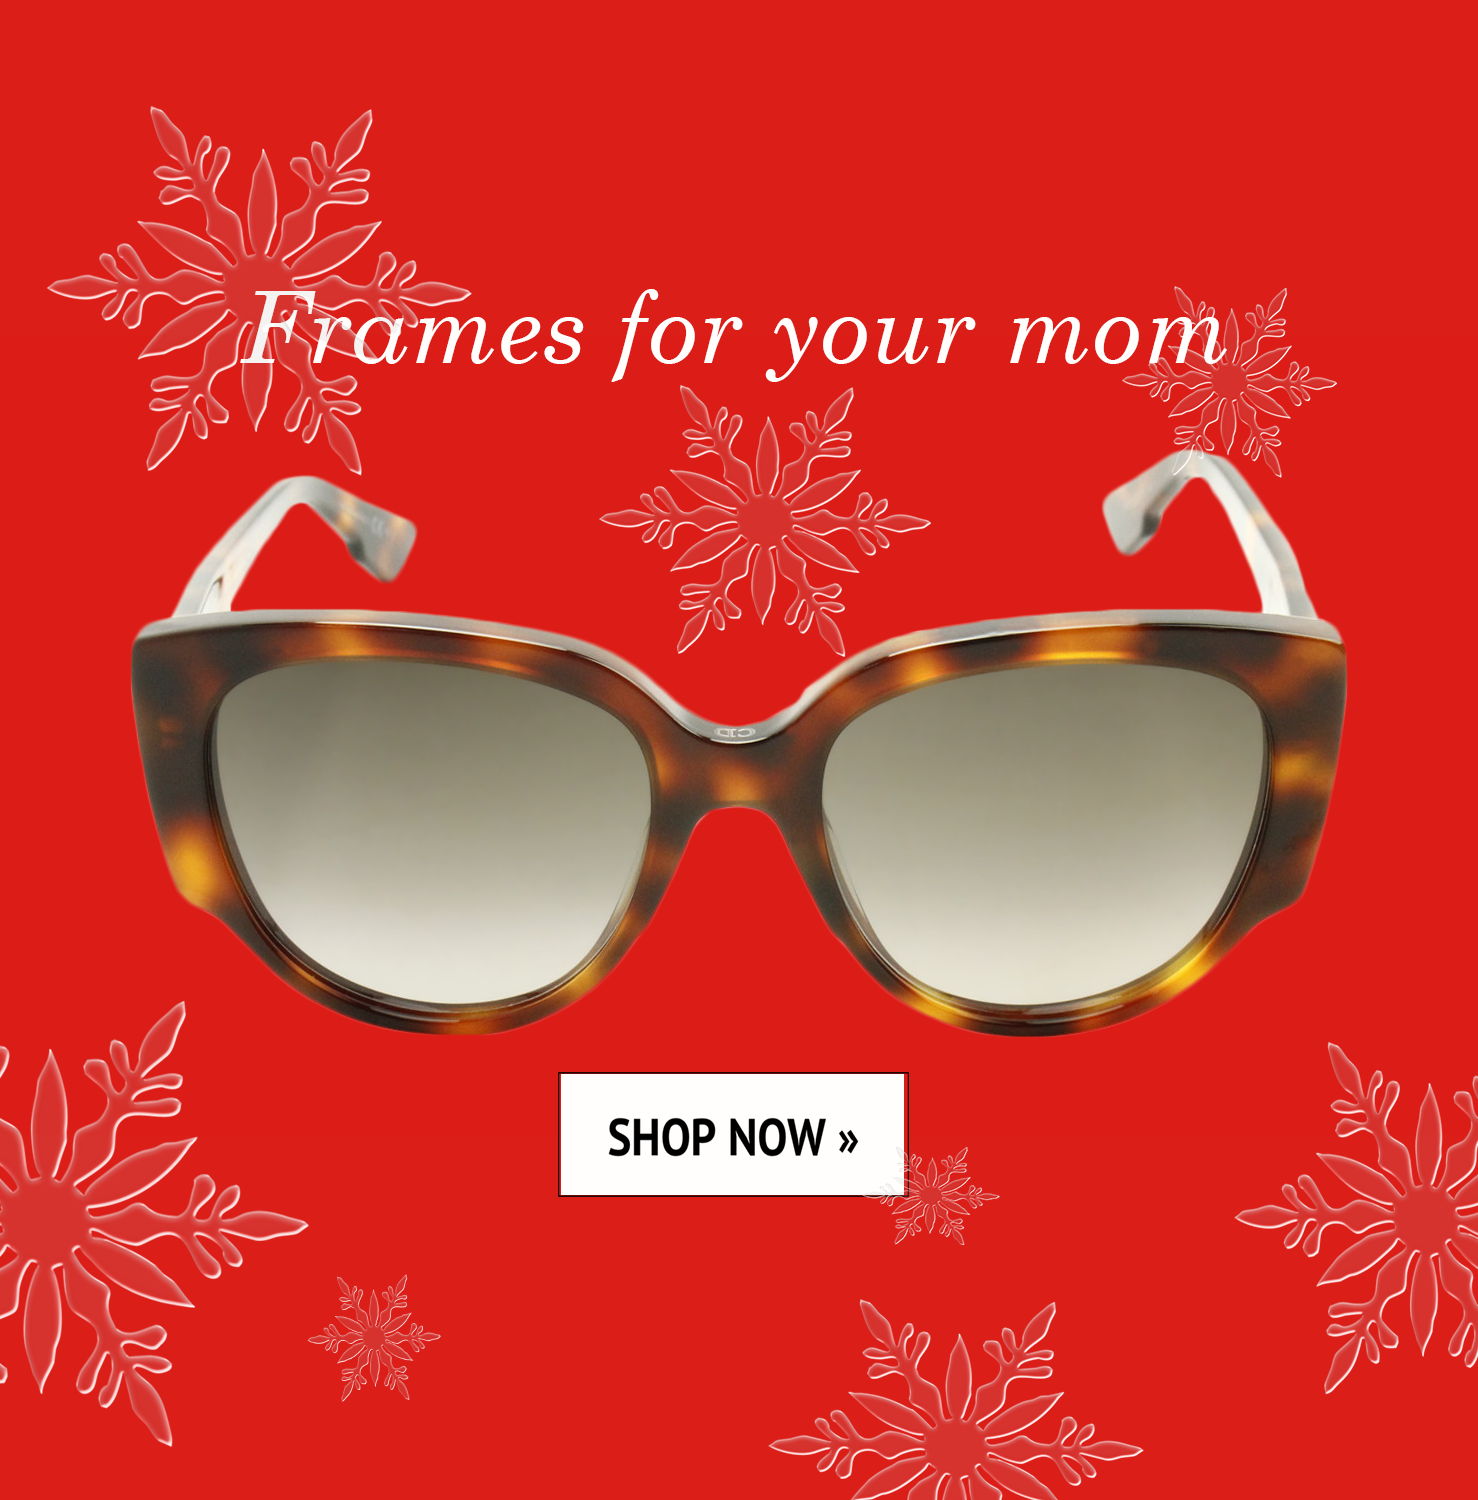 Frames for your mom